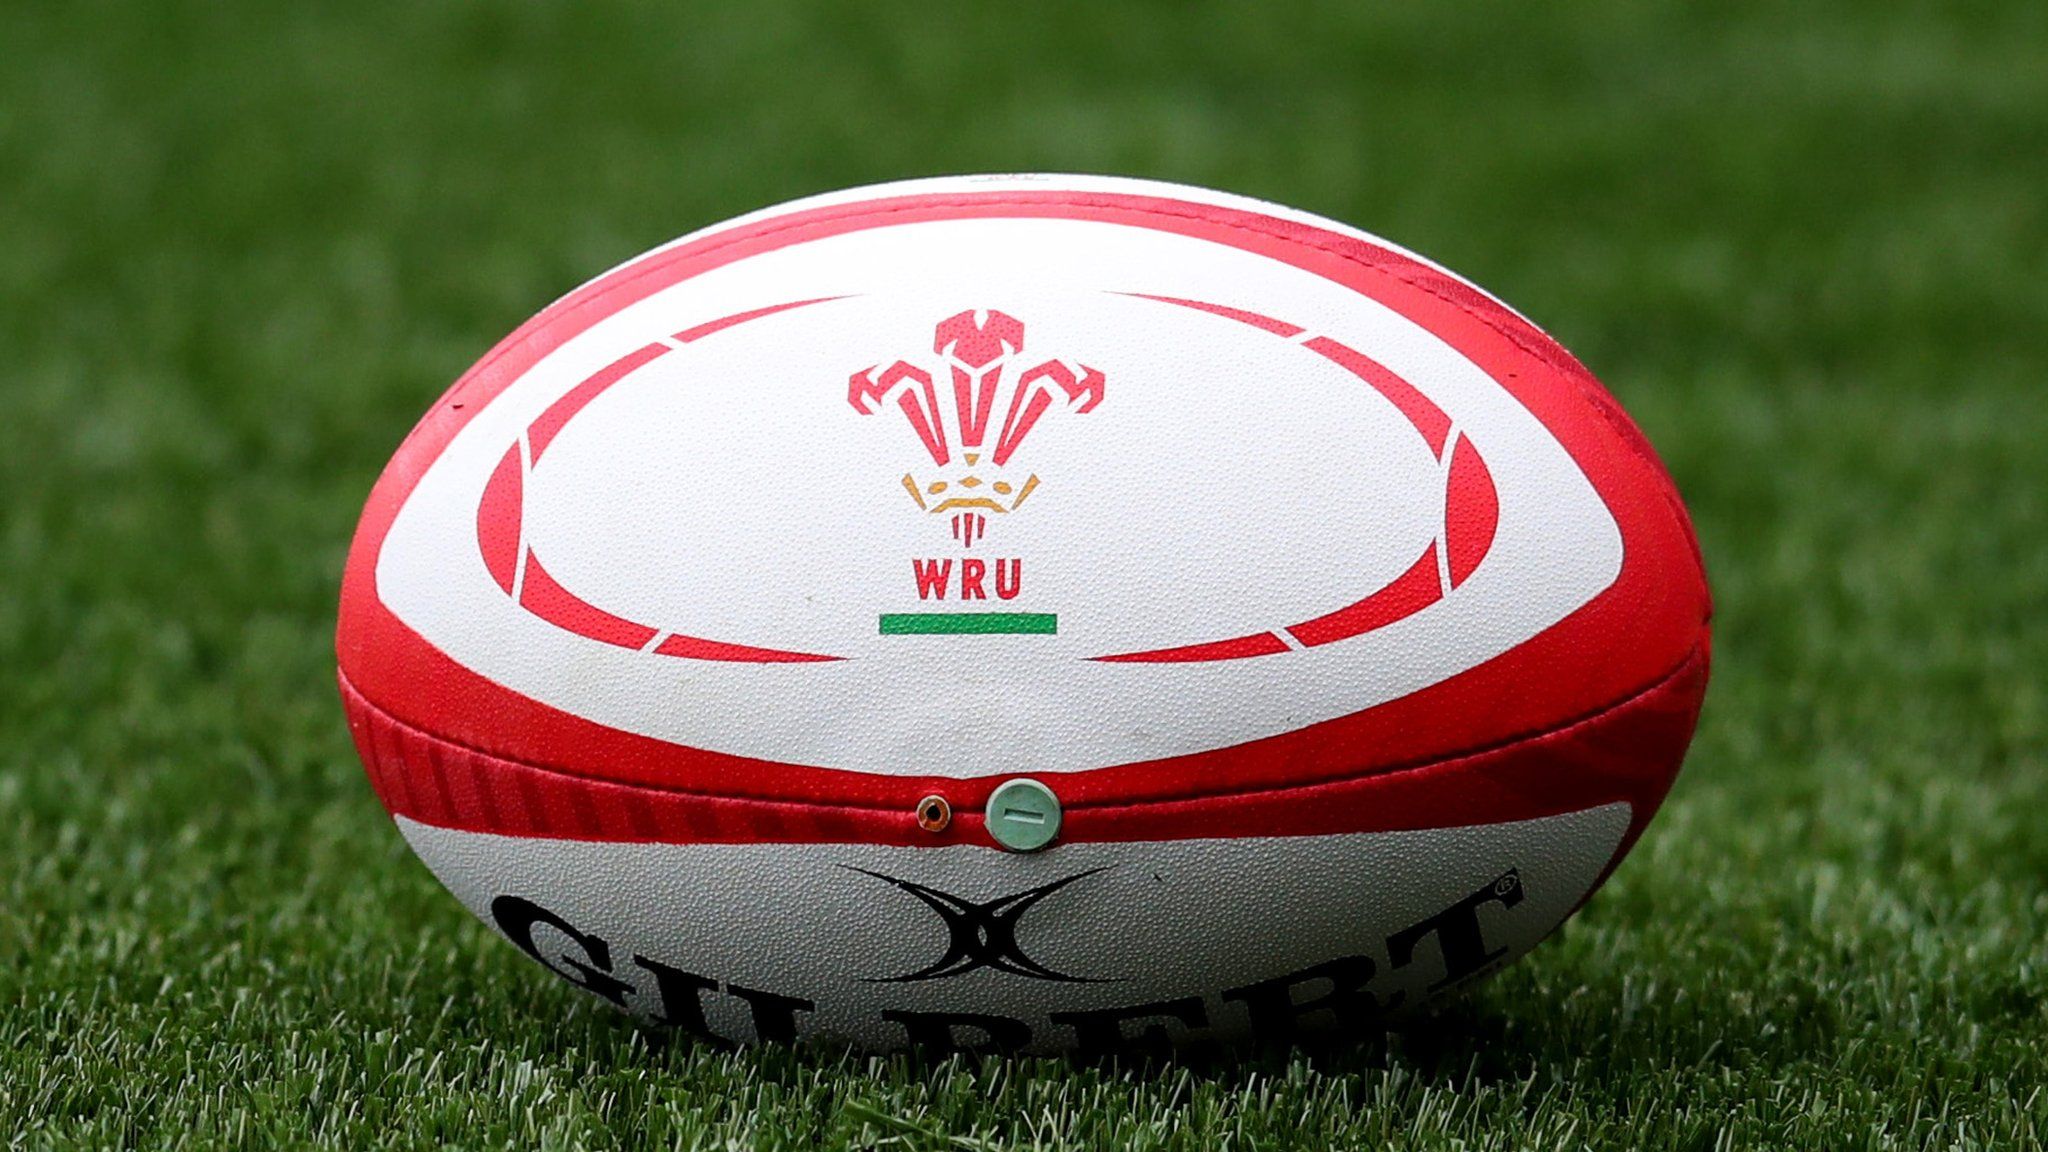 Rugby ball featuring Welsh Rugby Union logo